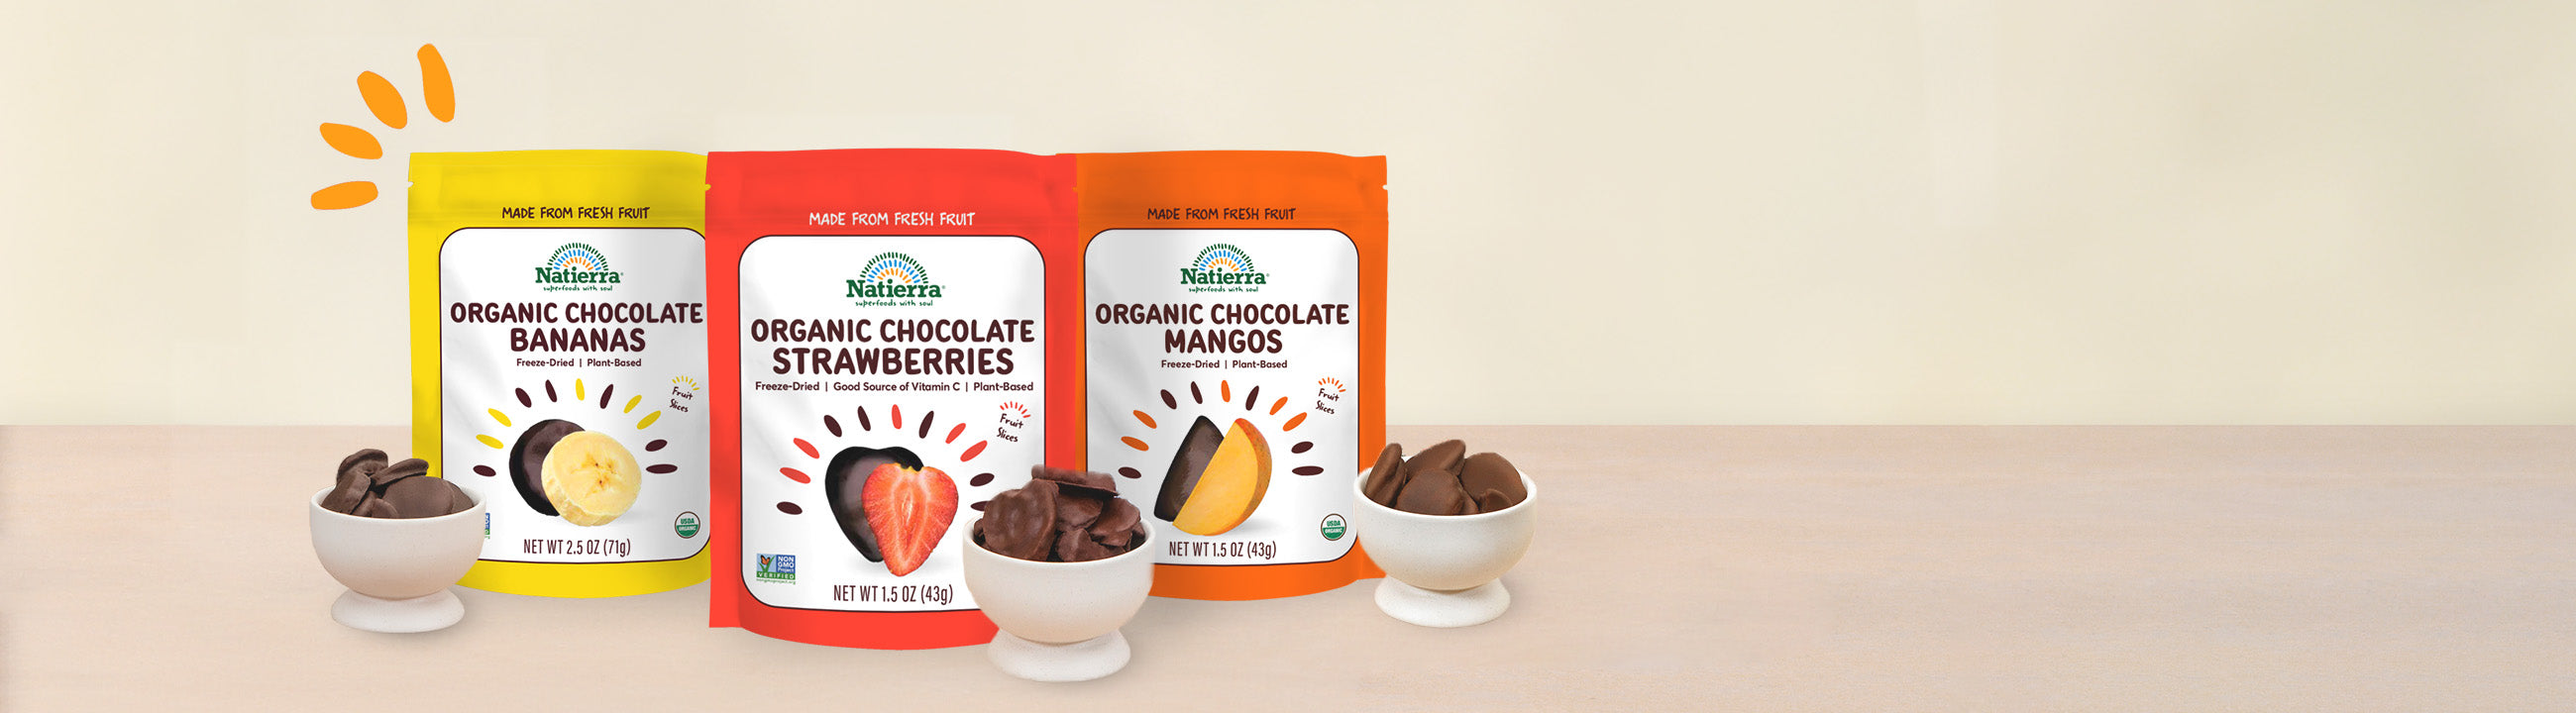 Freeze-dried chocolate covered products